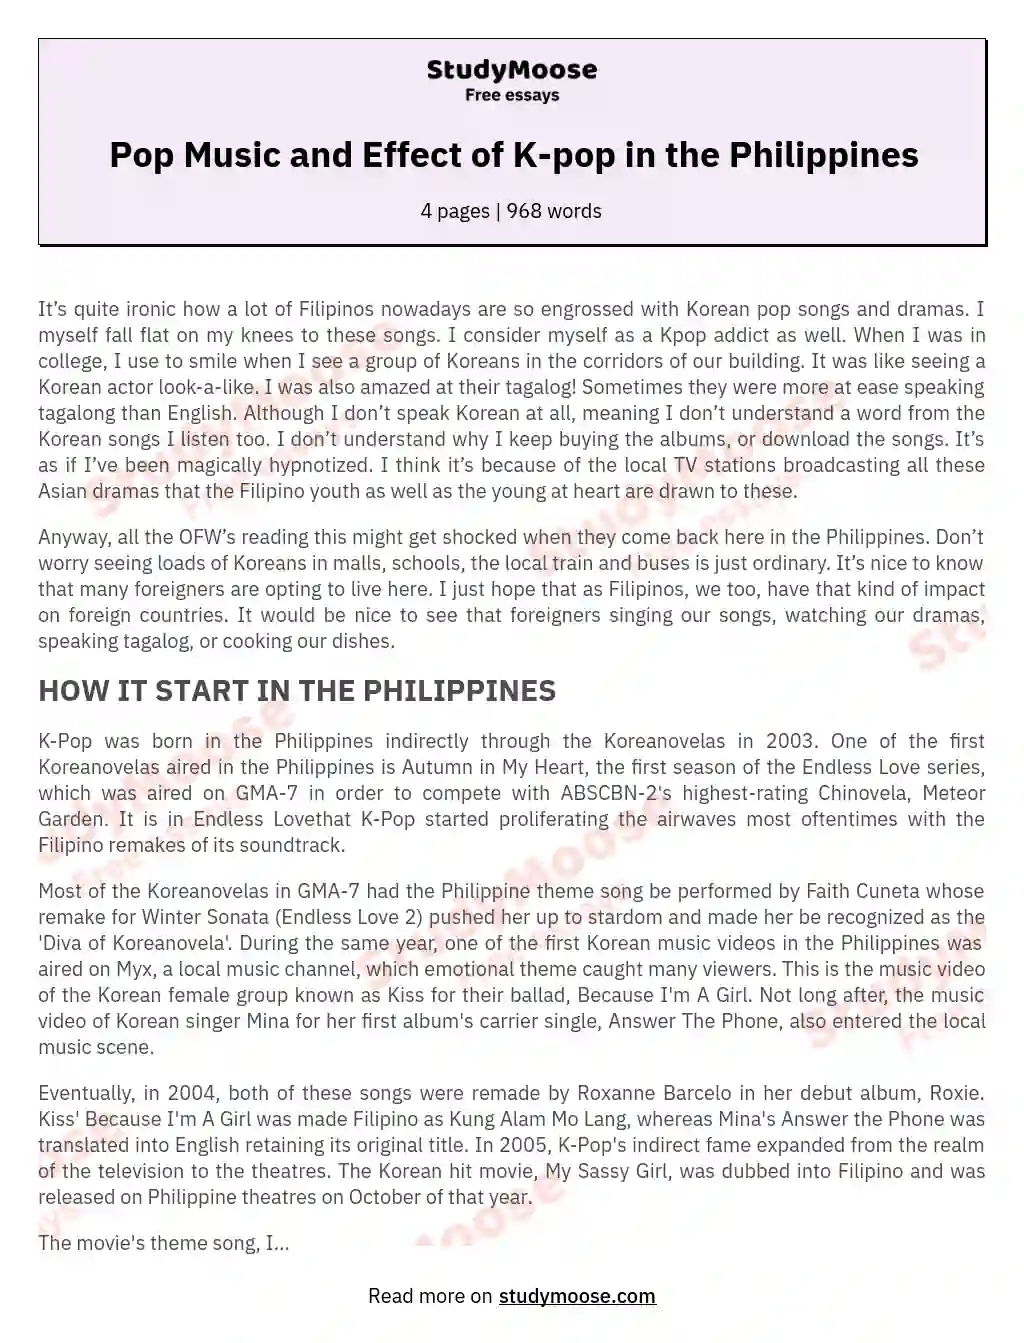 Pop Music and Effect of K-pop in the Philippines